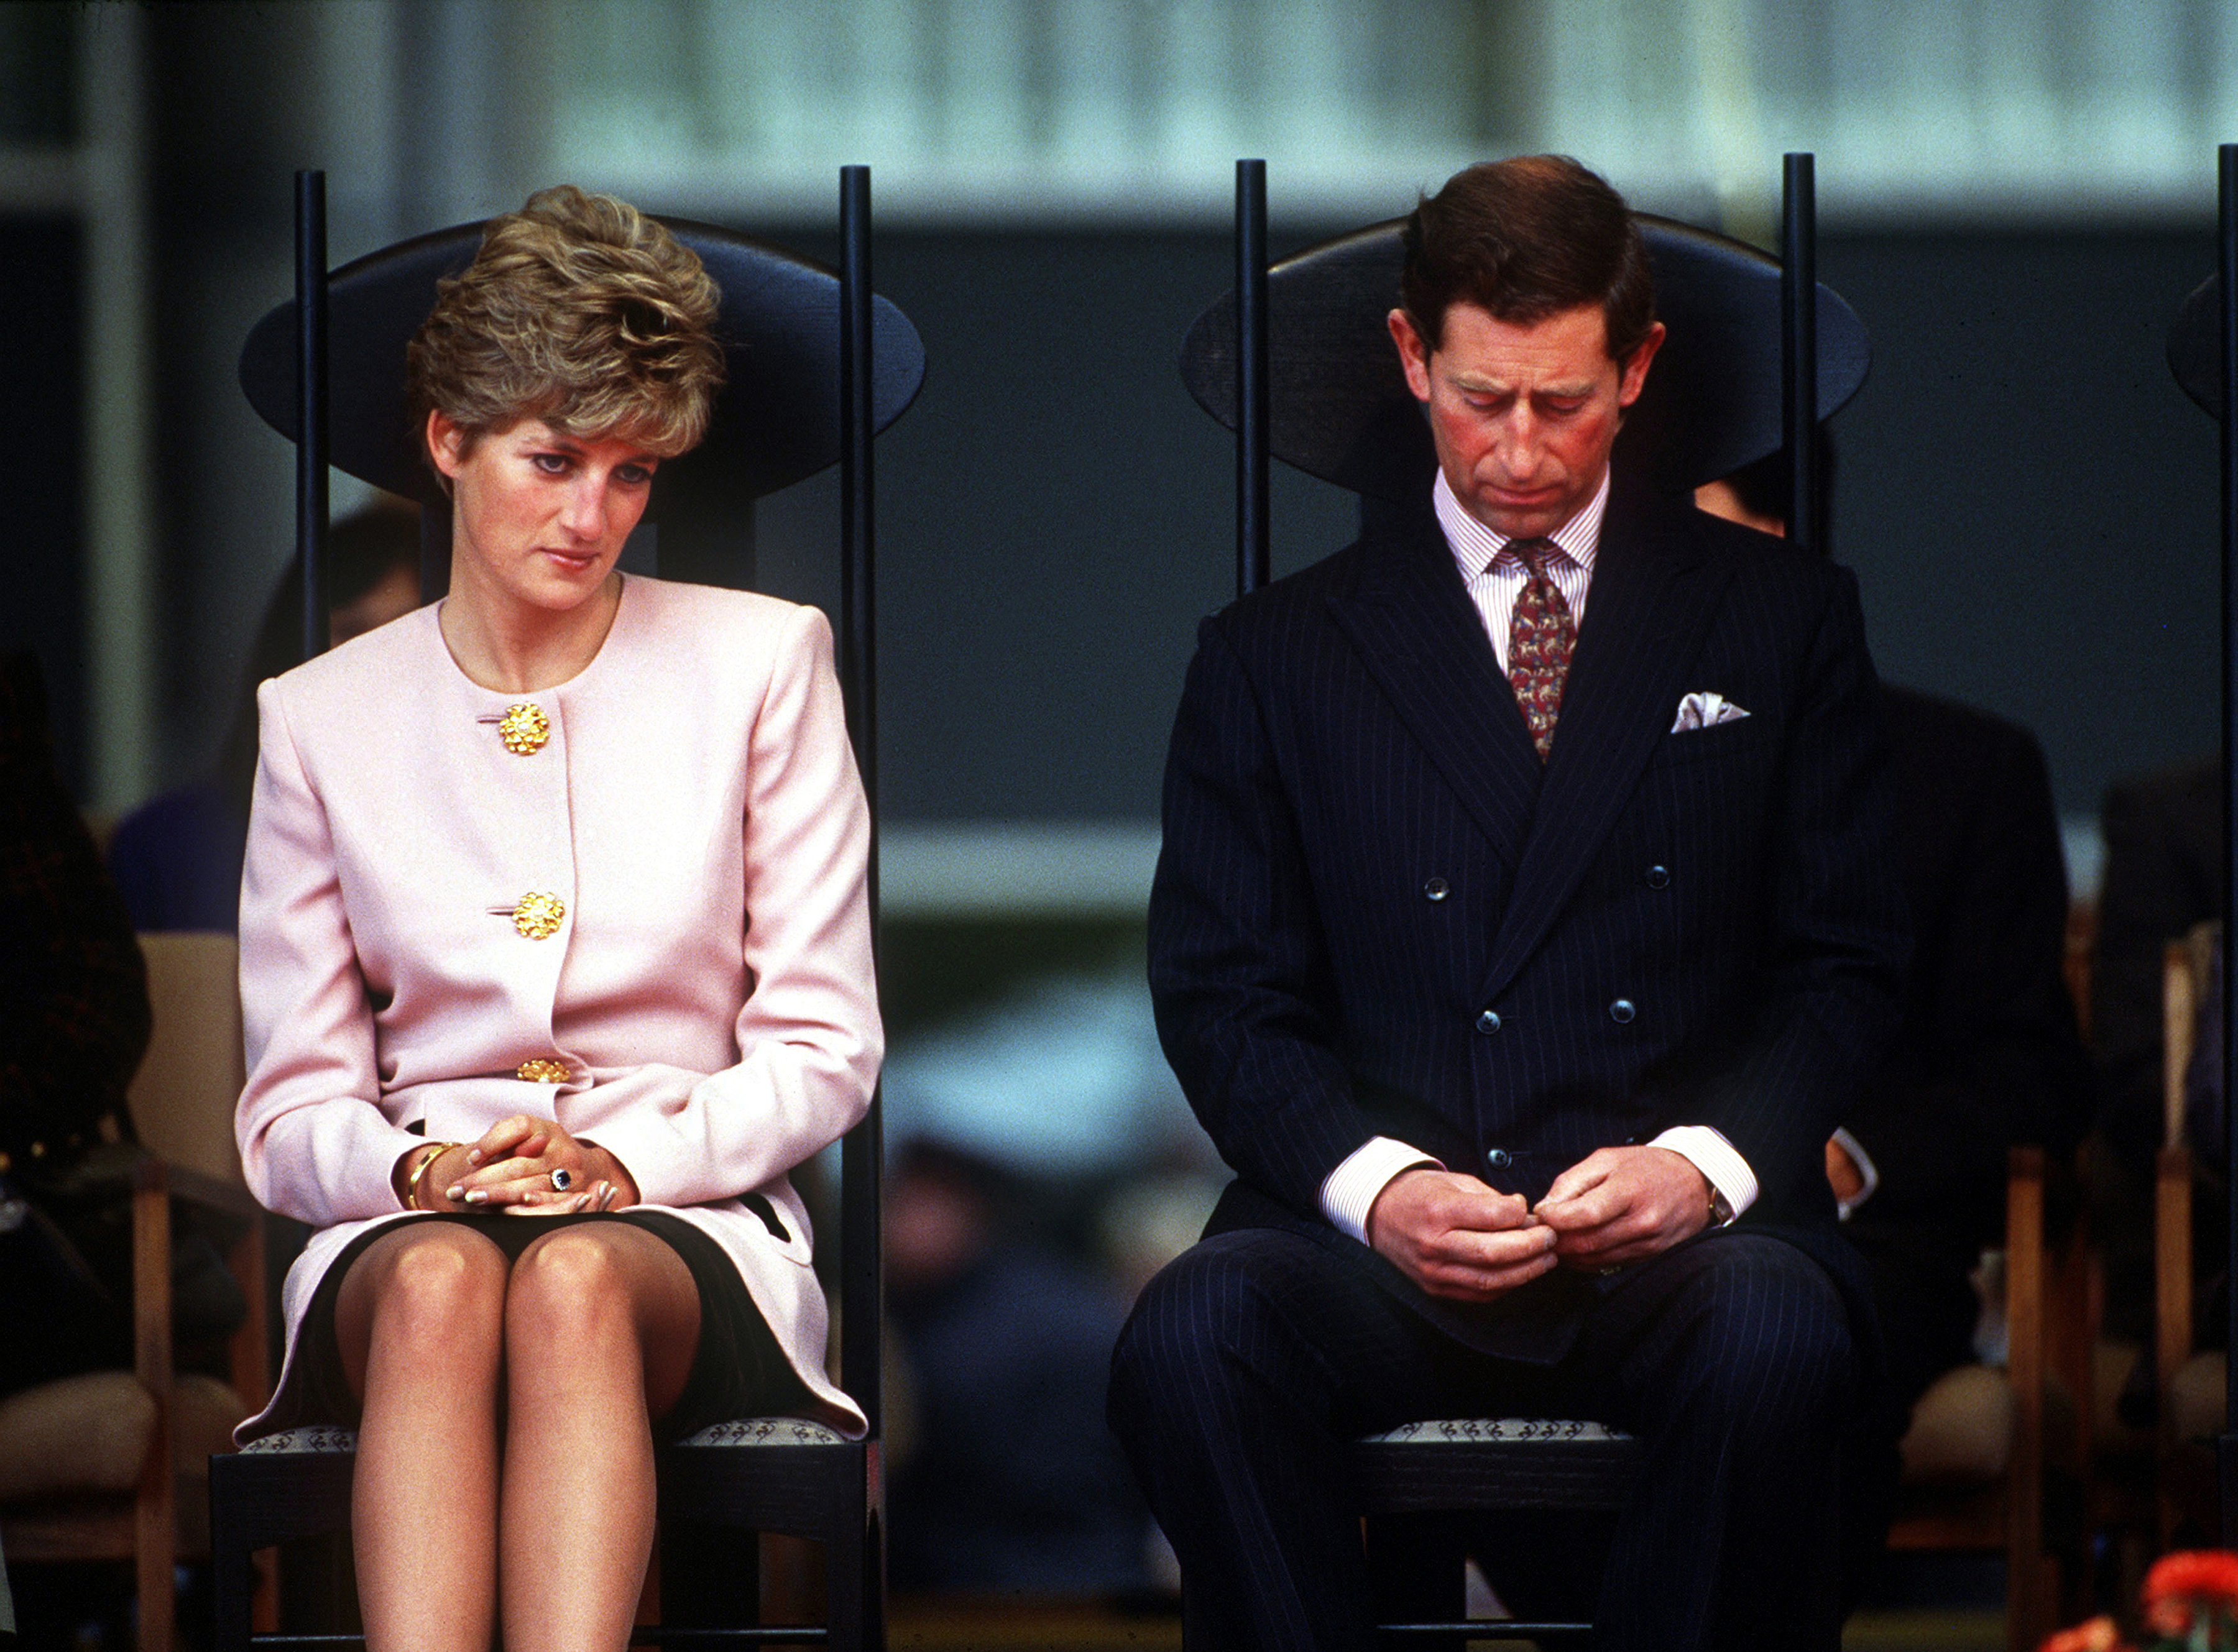 Princess Diana and King Charles III at a welcome ceremony in Toronto, Canada on October 1, 1991 | Source: Getty Images